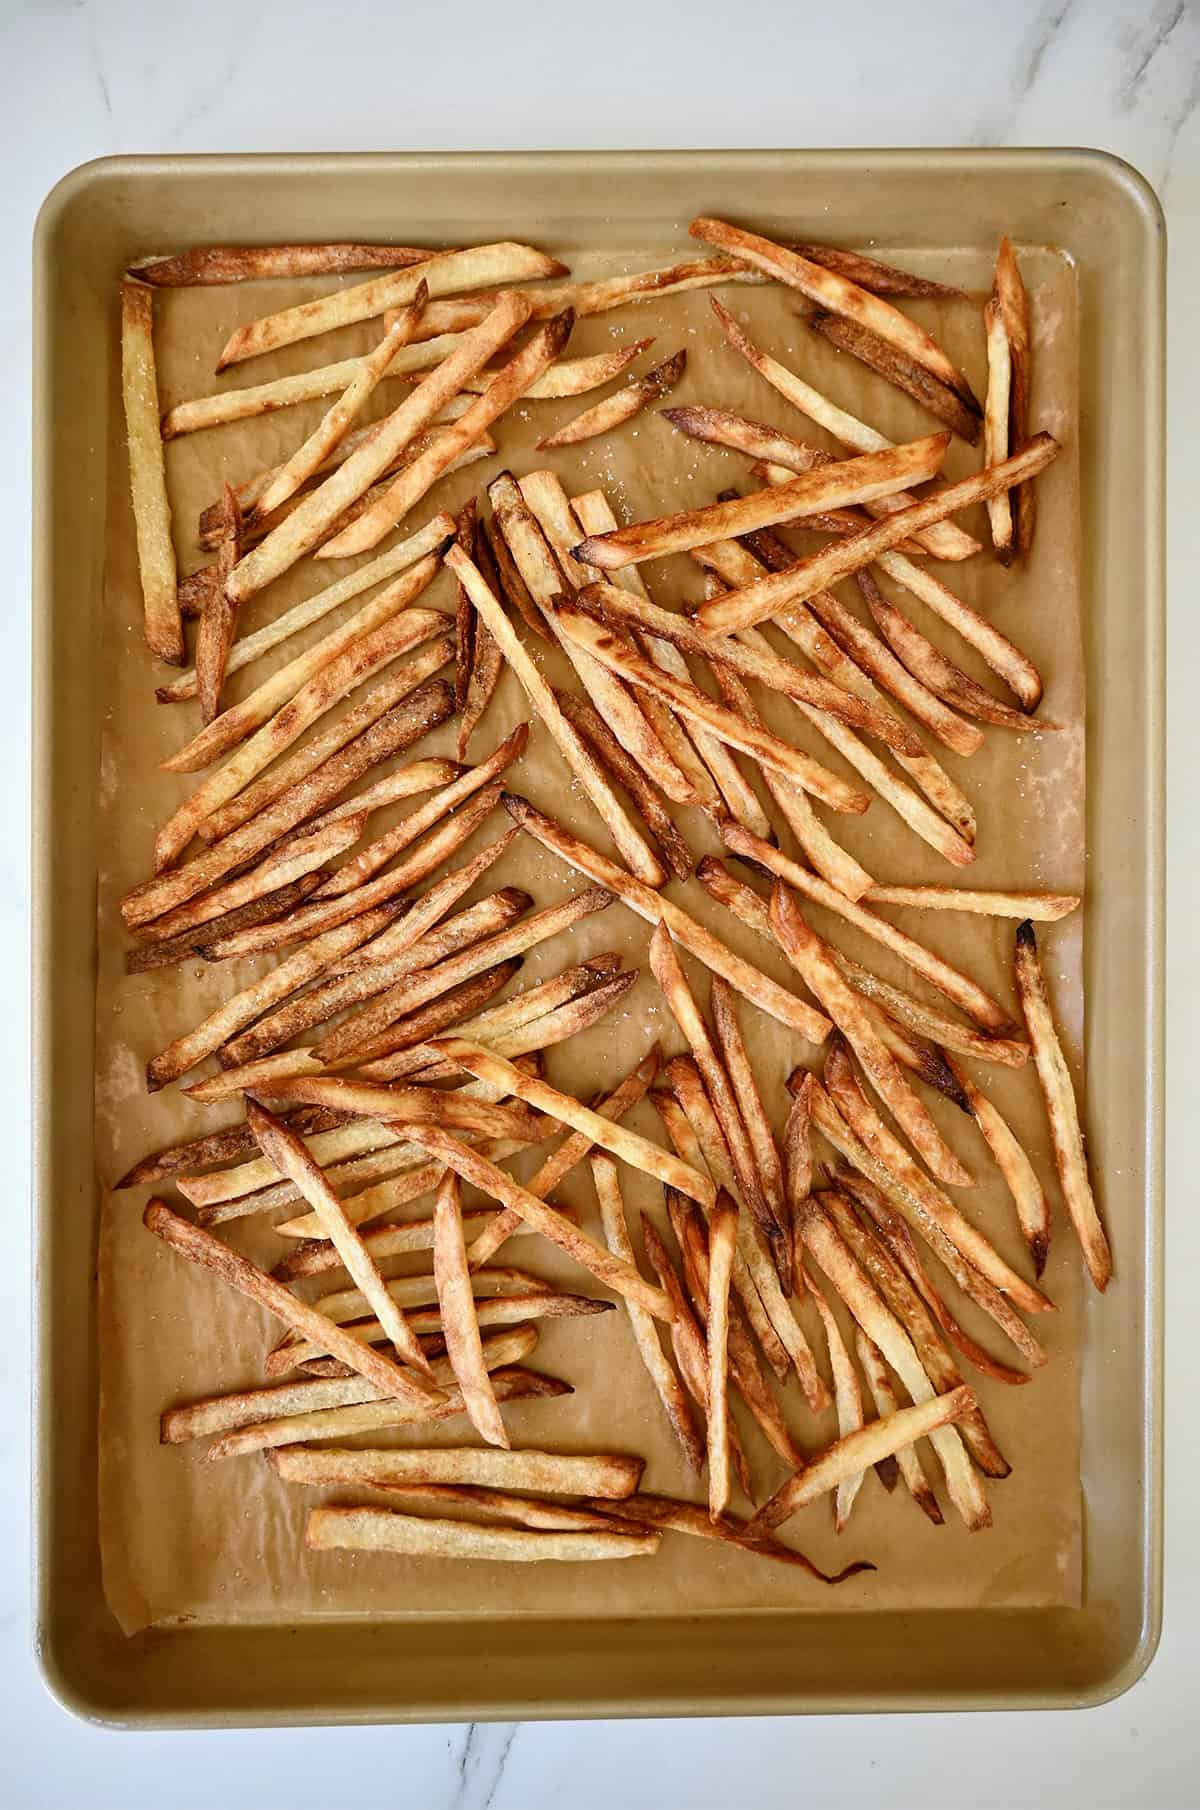 Crispy, golden brown baked fries on a parchment paper-lined baking sheet.